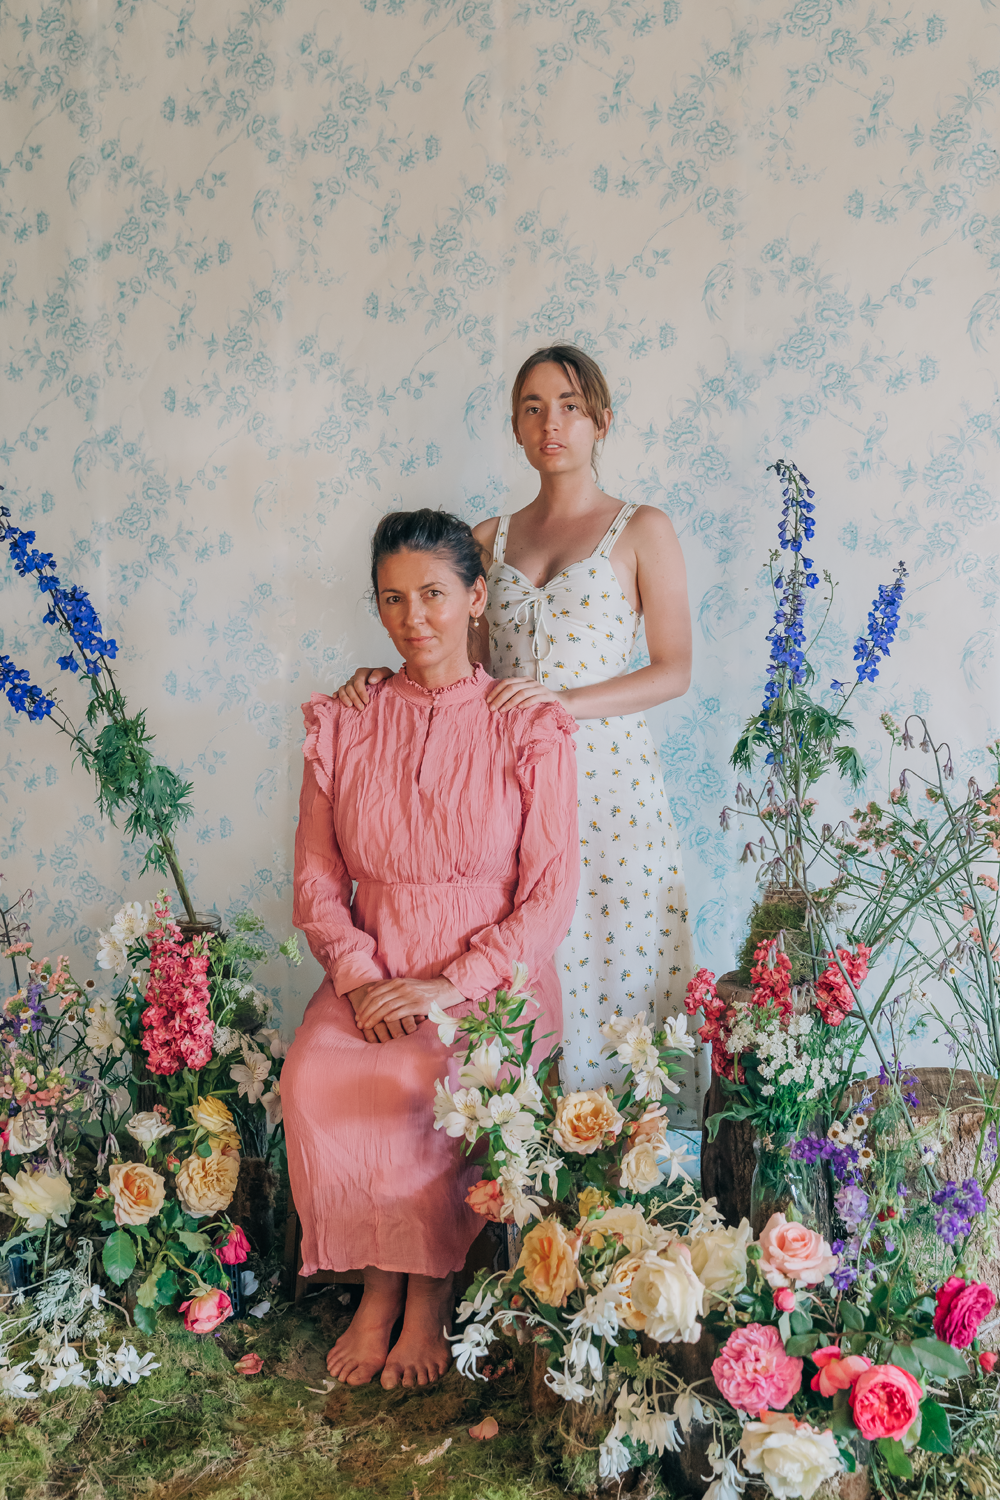 Colour photograph of a portrait of a young woman and older woman, sitting amongst greenery and an array of flowers. Young woman stands behind seated older woman.